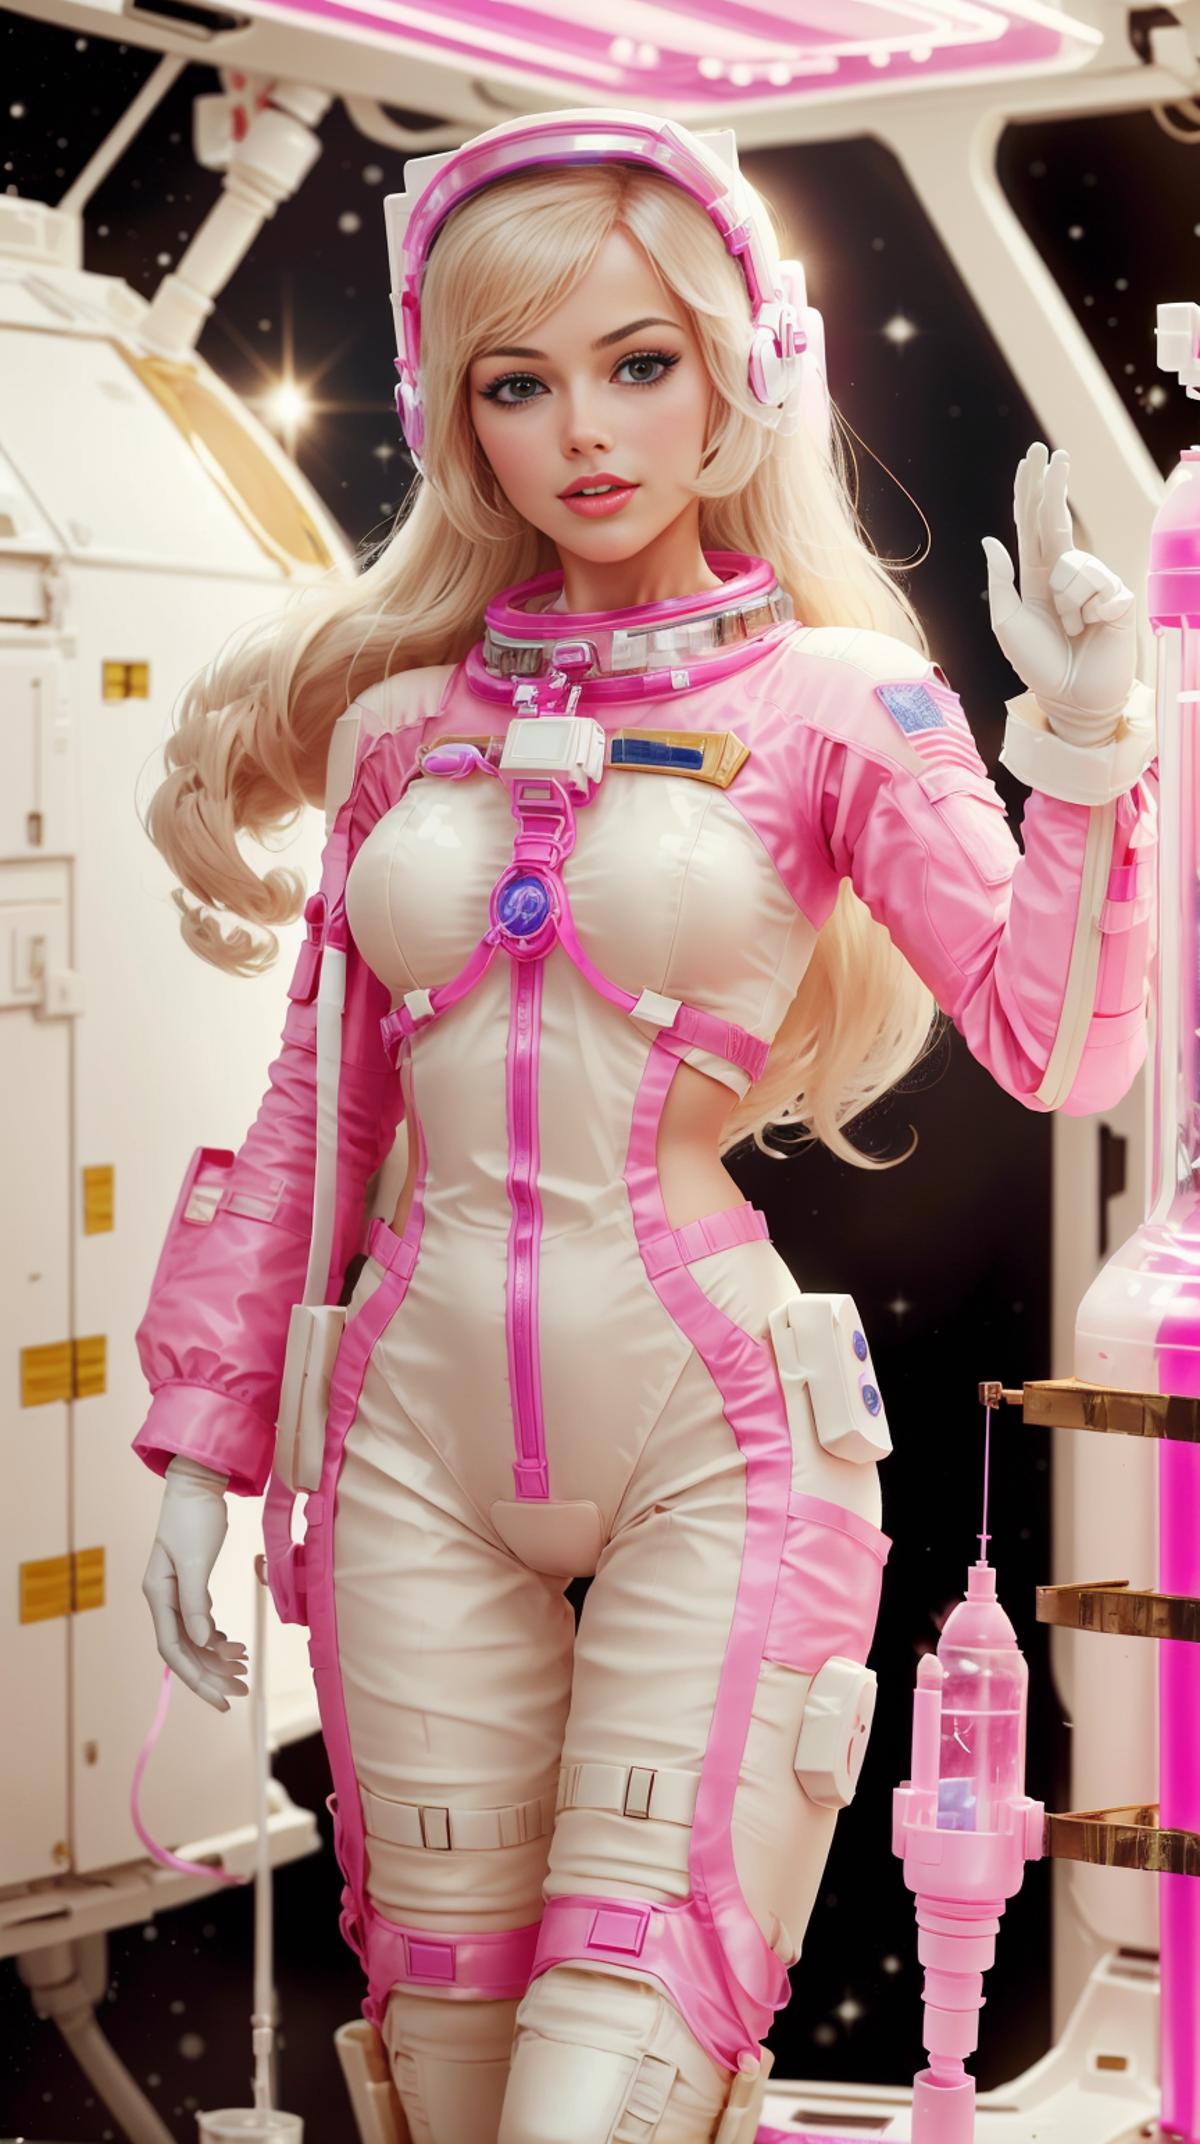 Barbiecore - Barbify Anything! image by mnemic